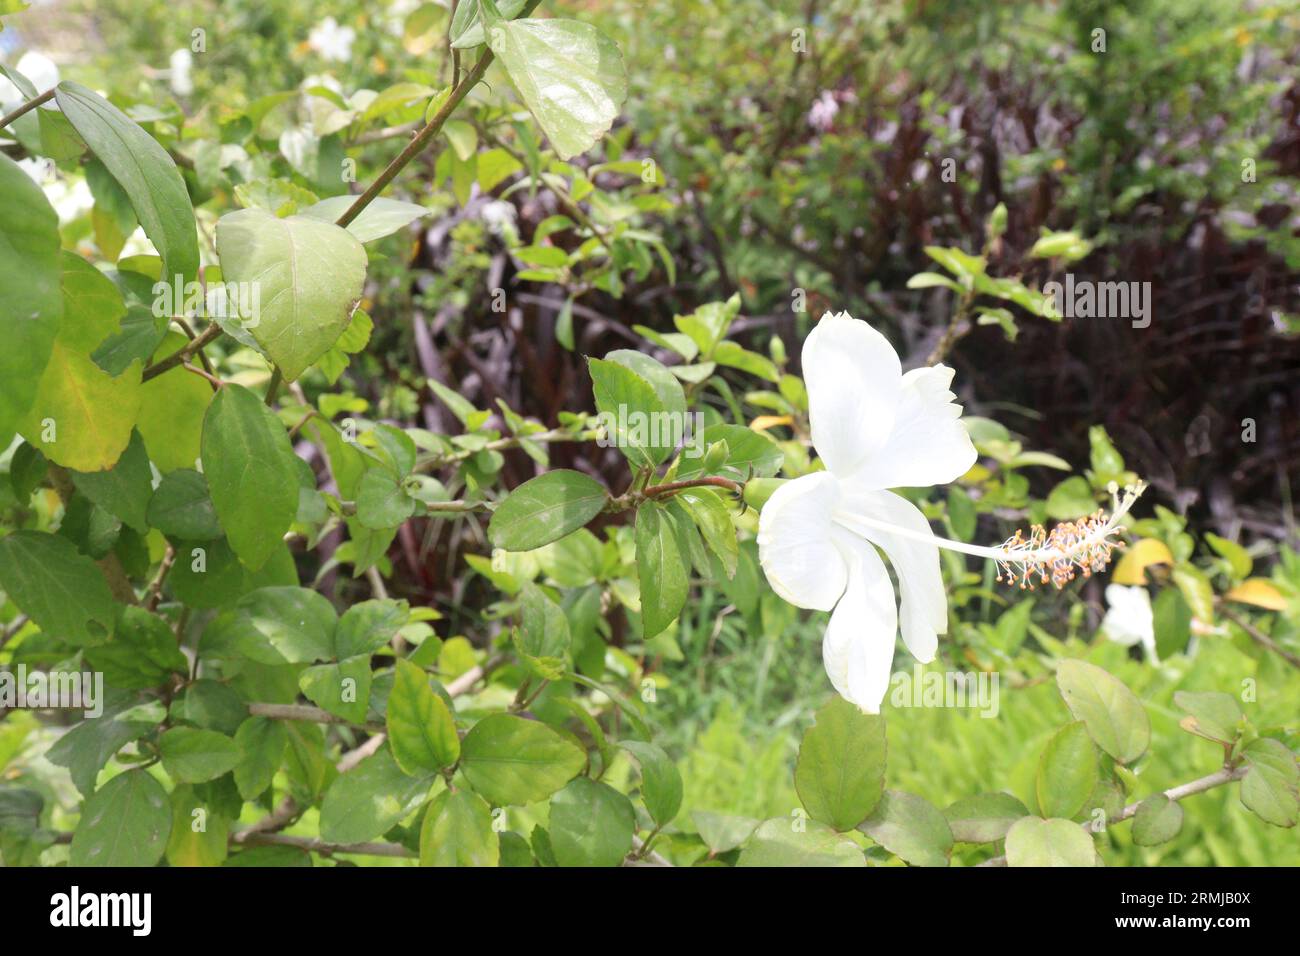 White colored shoeblackplant flower on garden for harvest are cash crops Stock Photo